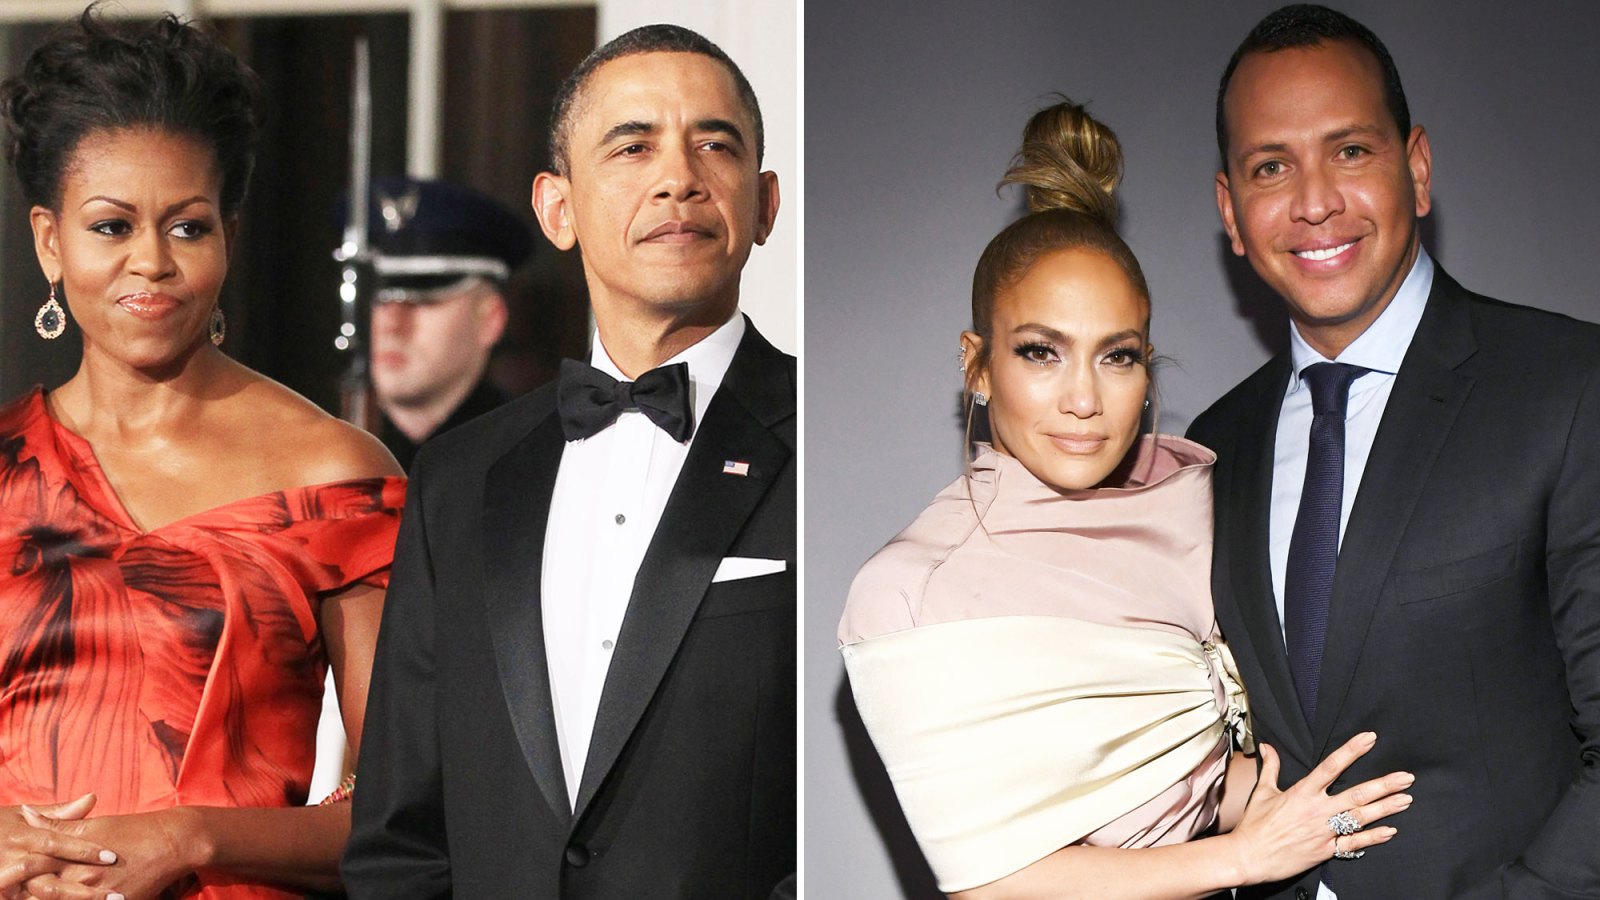 Barack and Michelle Obama Send Jennifer Lopez and Alex Rodriguez a Handwritten Note on Engagement